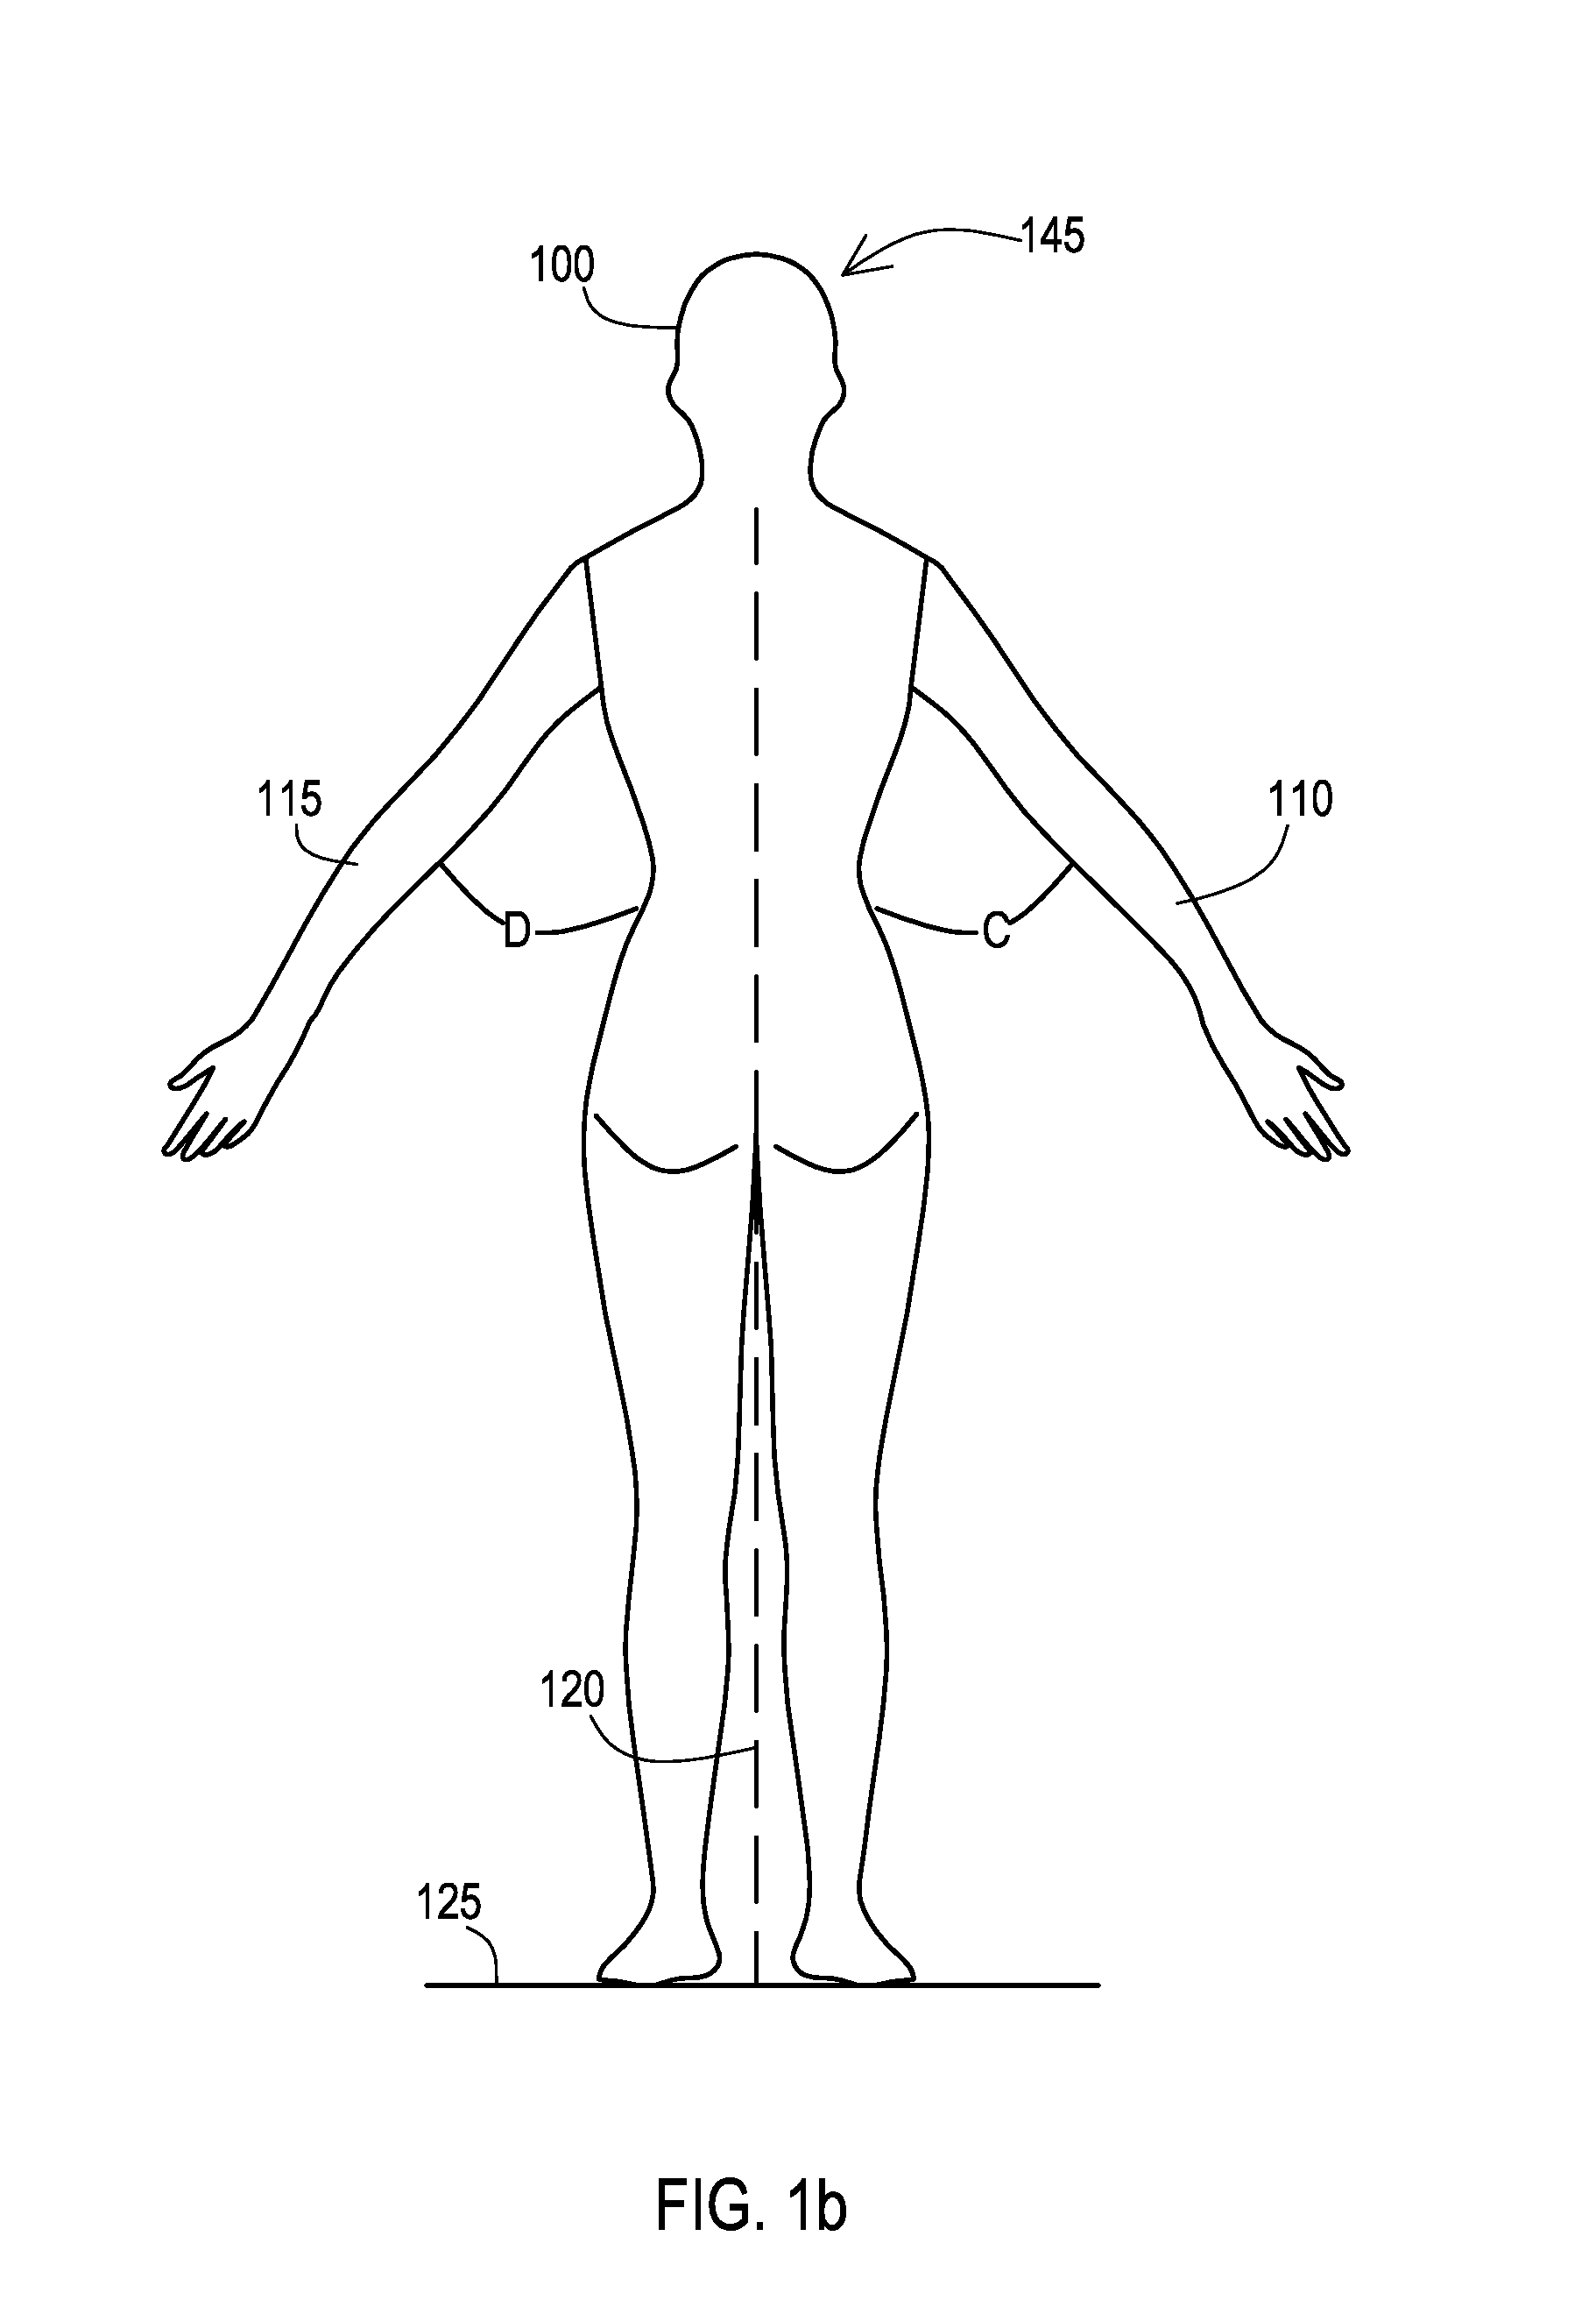 Methods for detecting, monitoring and treating lymphedema